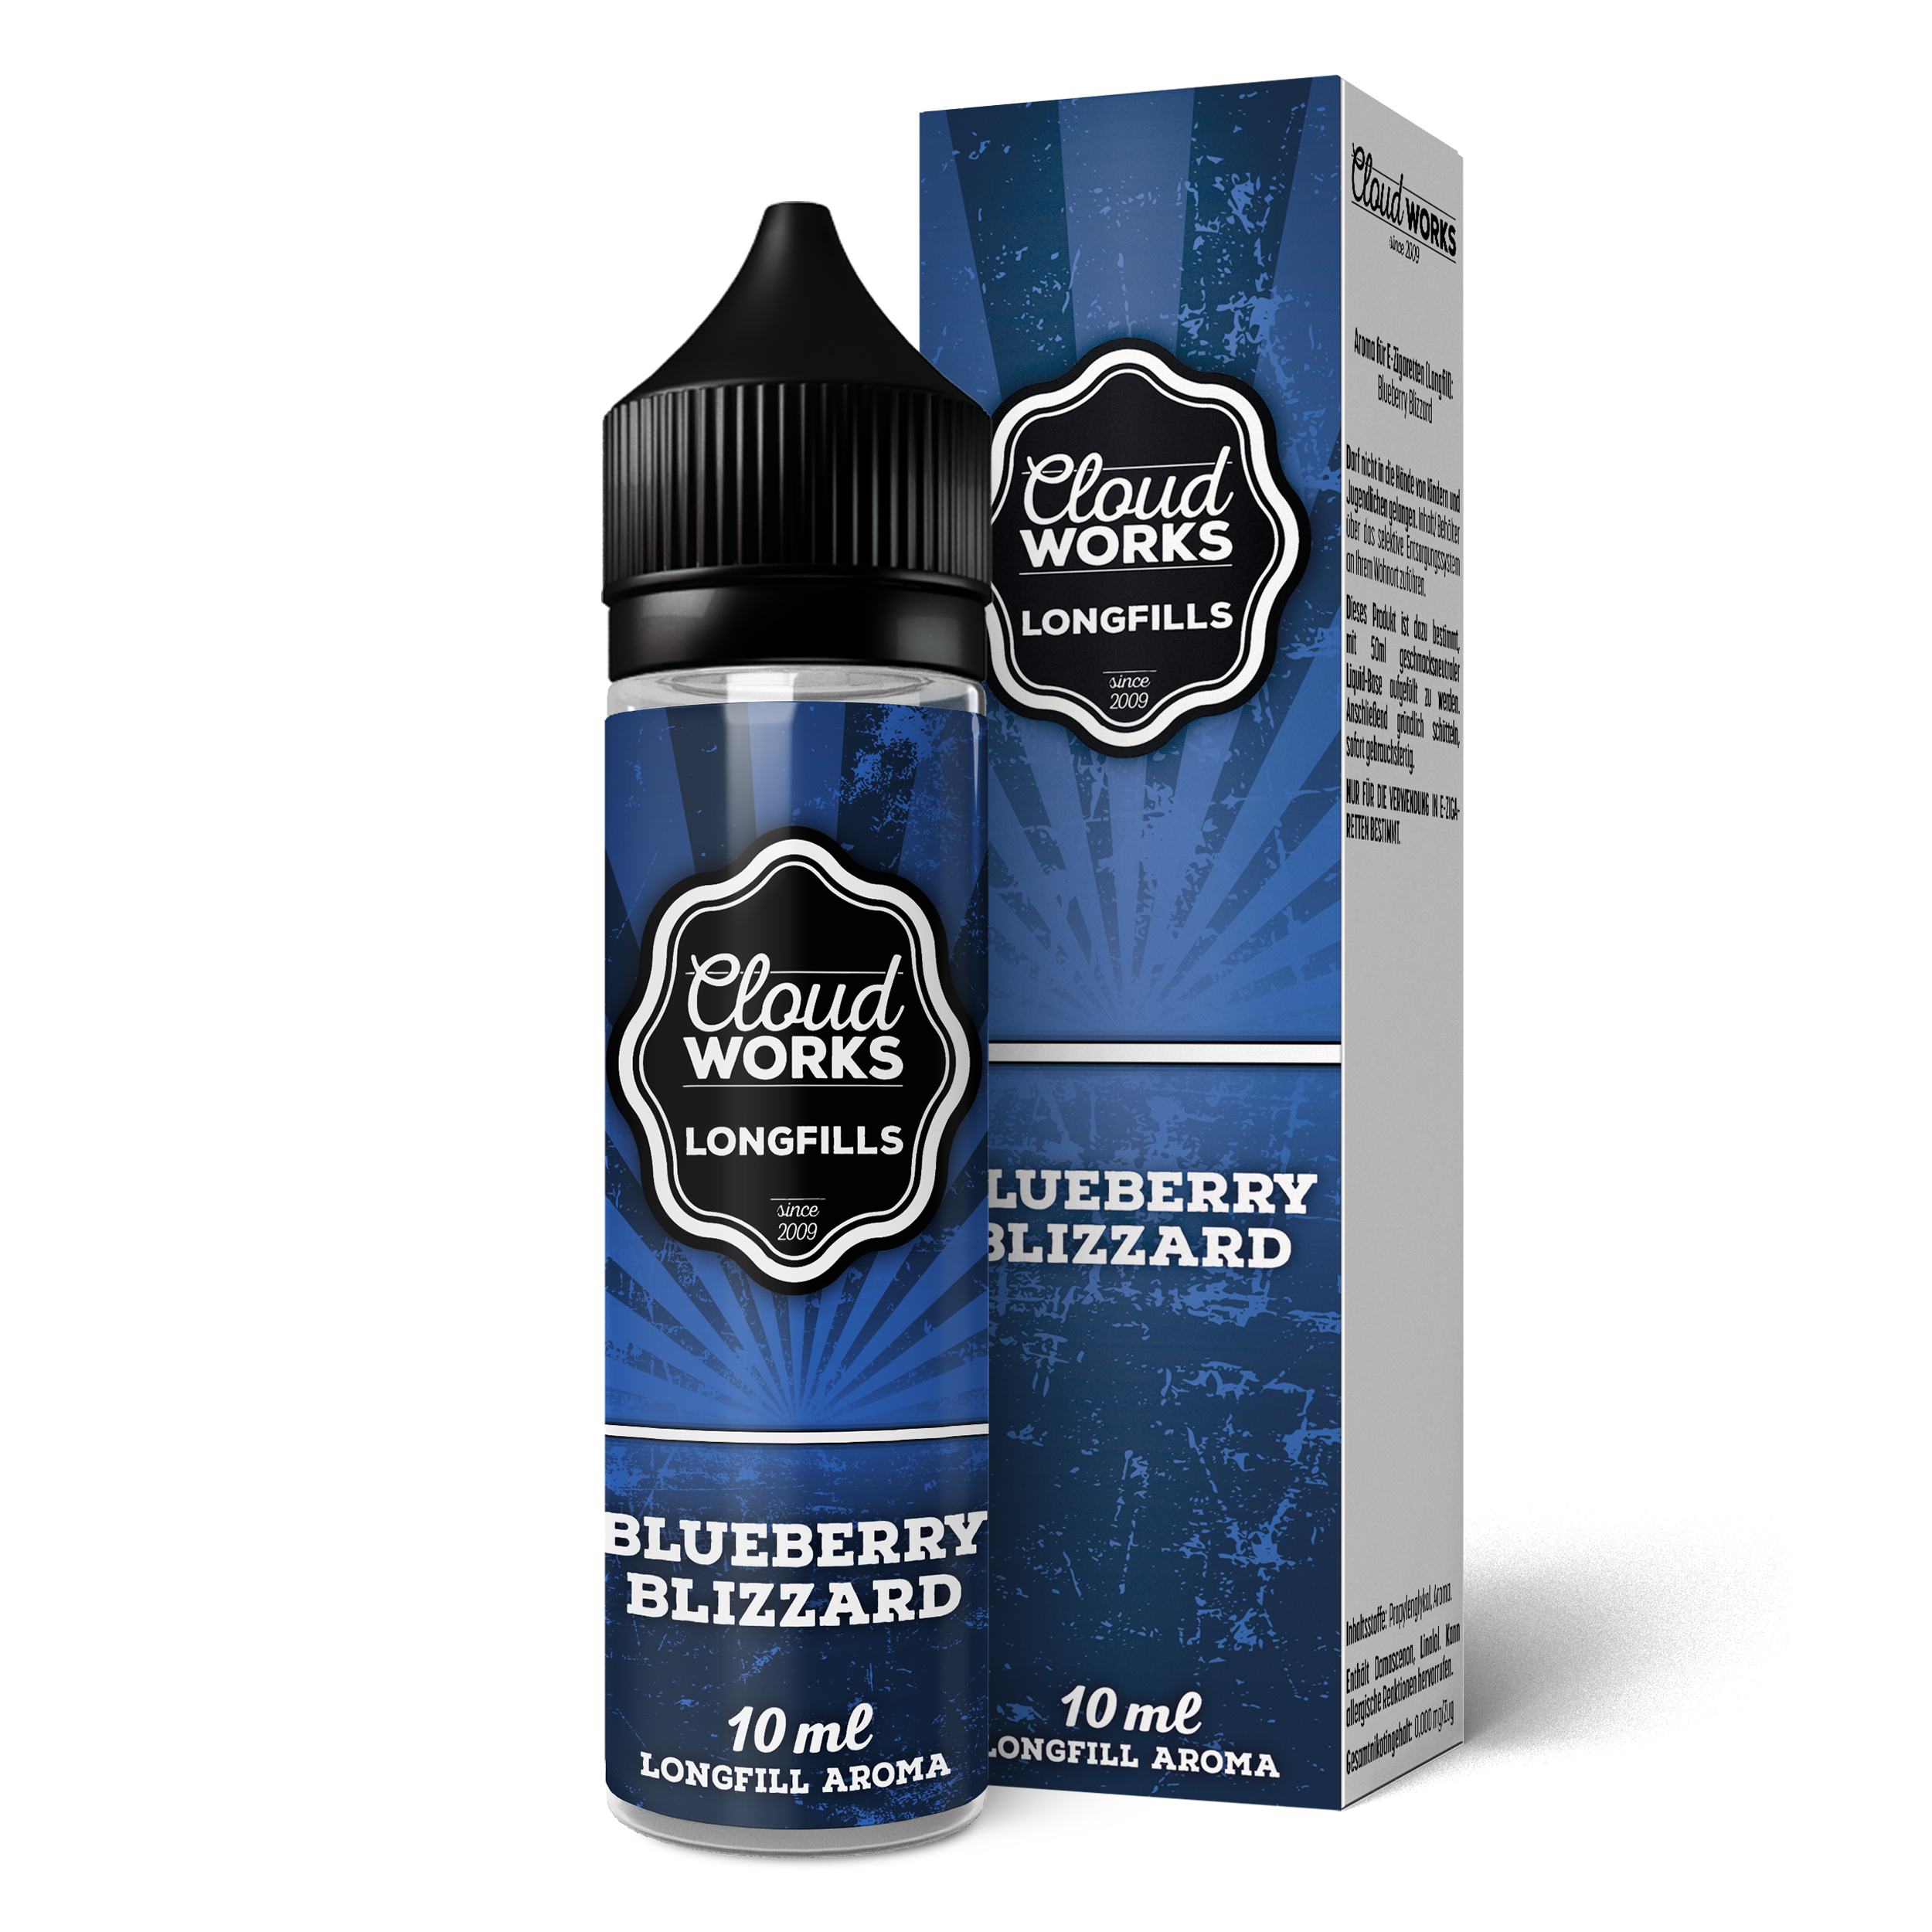 Cloudworks Overdosed | Blueberry Blizzard | Longfill Aroma 10ml in 60ml Flasche